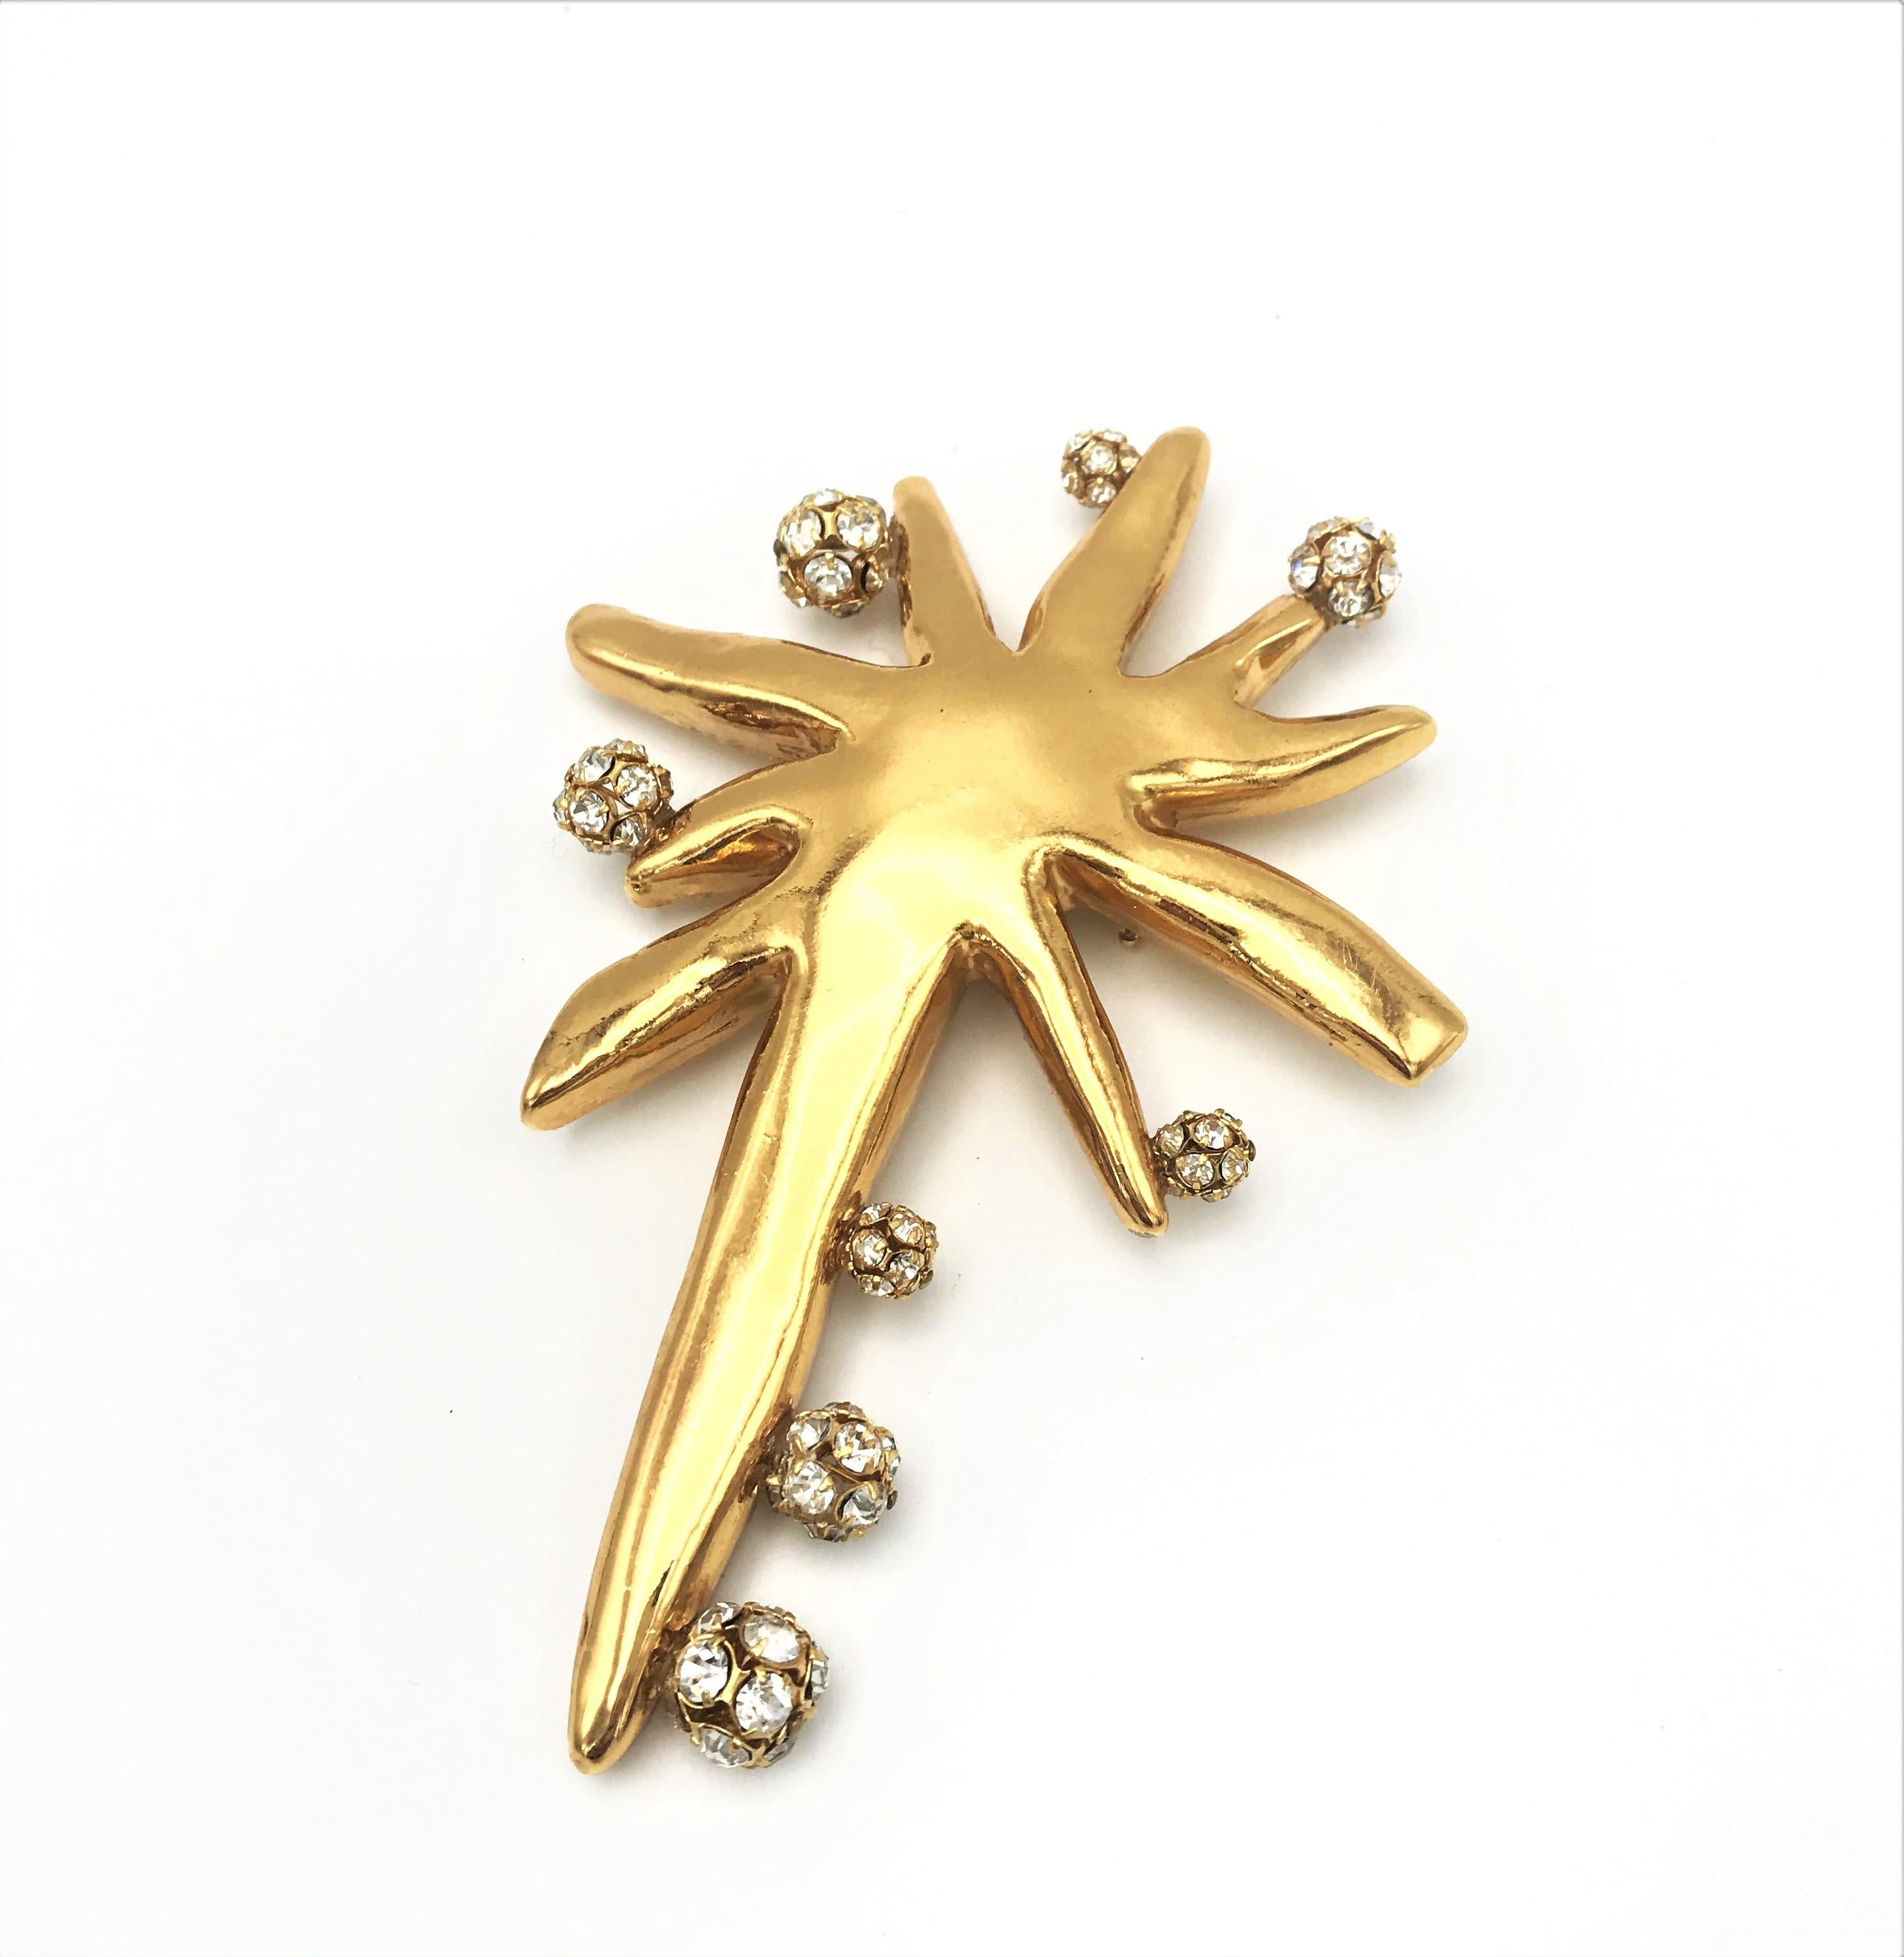 The allure of bold Costume Jewelry !
A very rare and unusual large brooch in the shape of a star by Christian Lacroix Paris. On the rays are glittering balls with cut rhinestones. Signed on the back with the typical Lacroix signature.
Measurement: